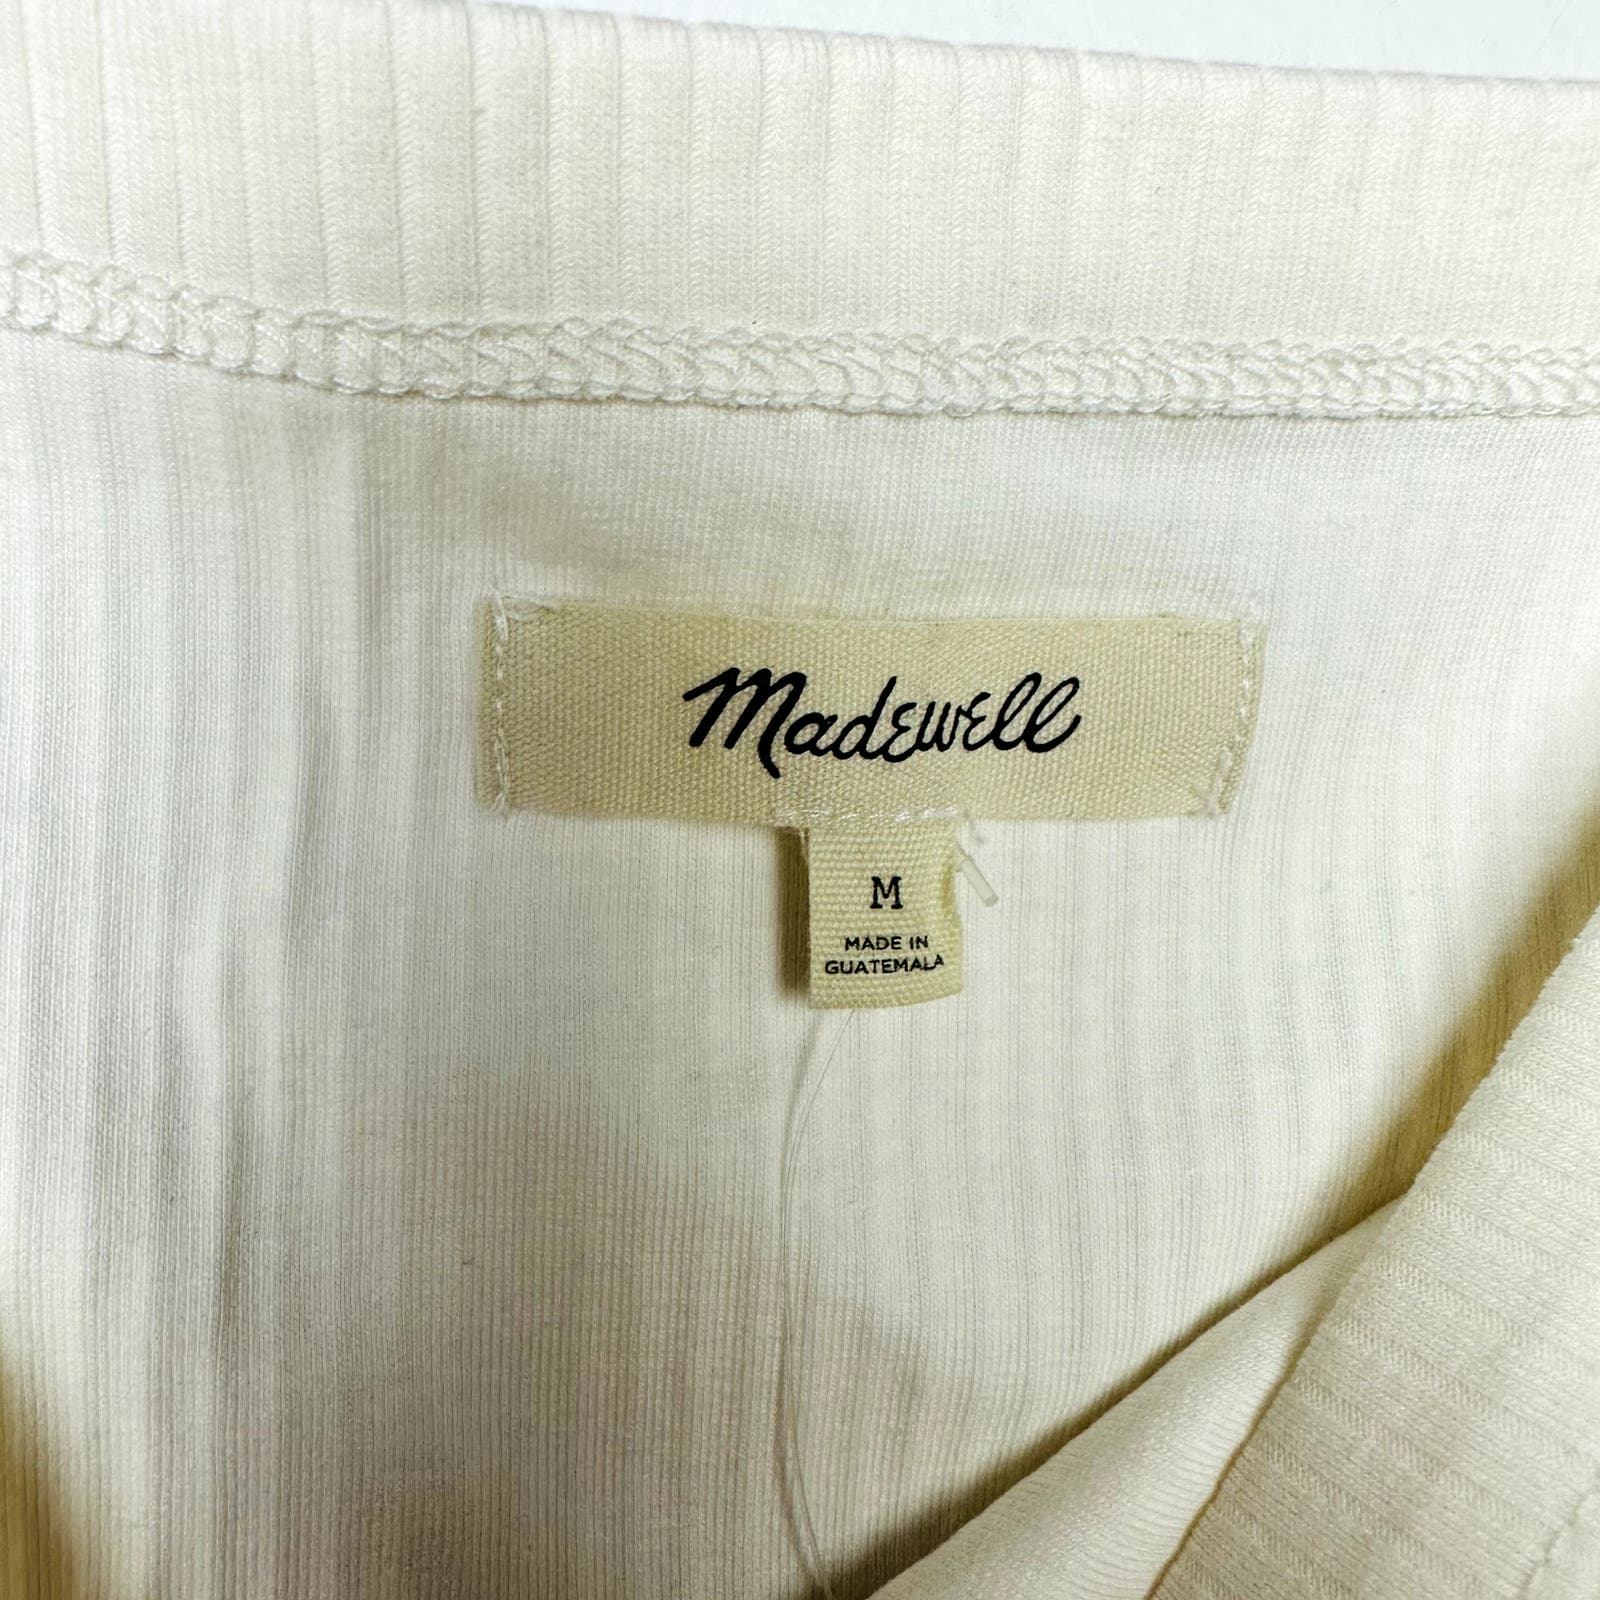 Madewell NWT White The Tailored Crop Tank in Sleekhold Size Medium